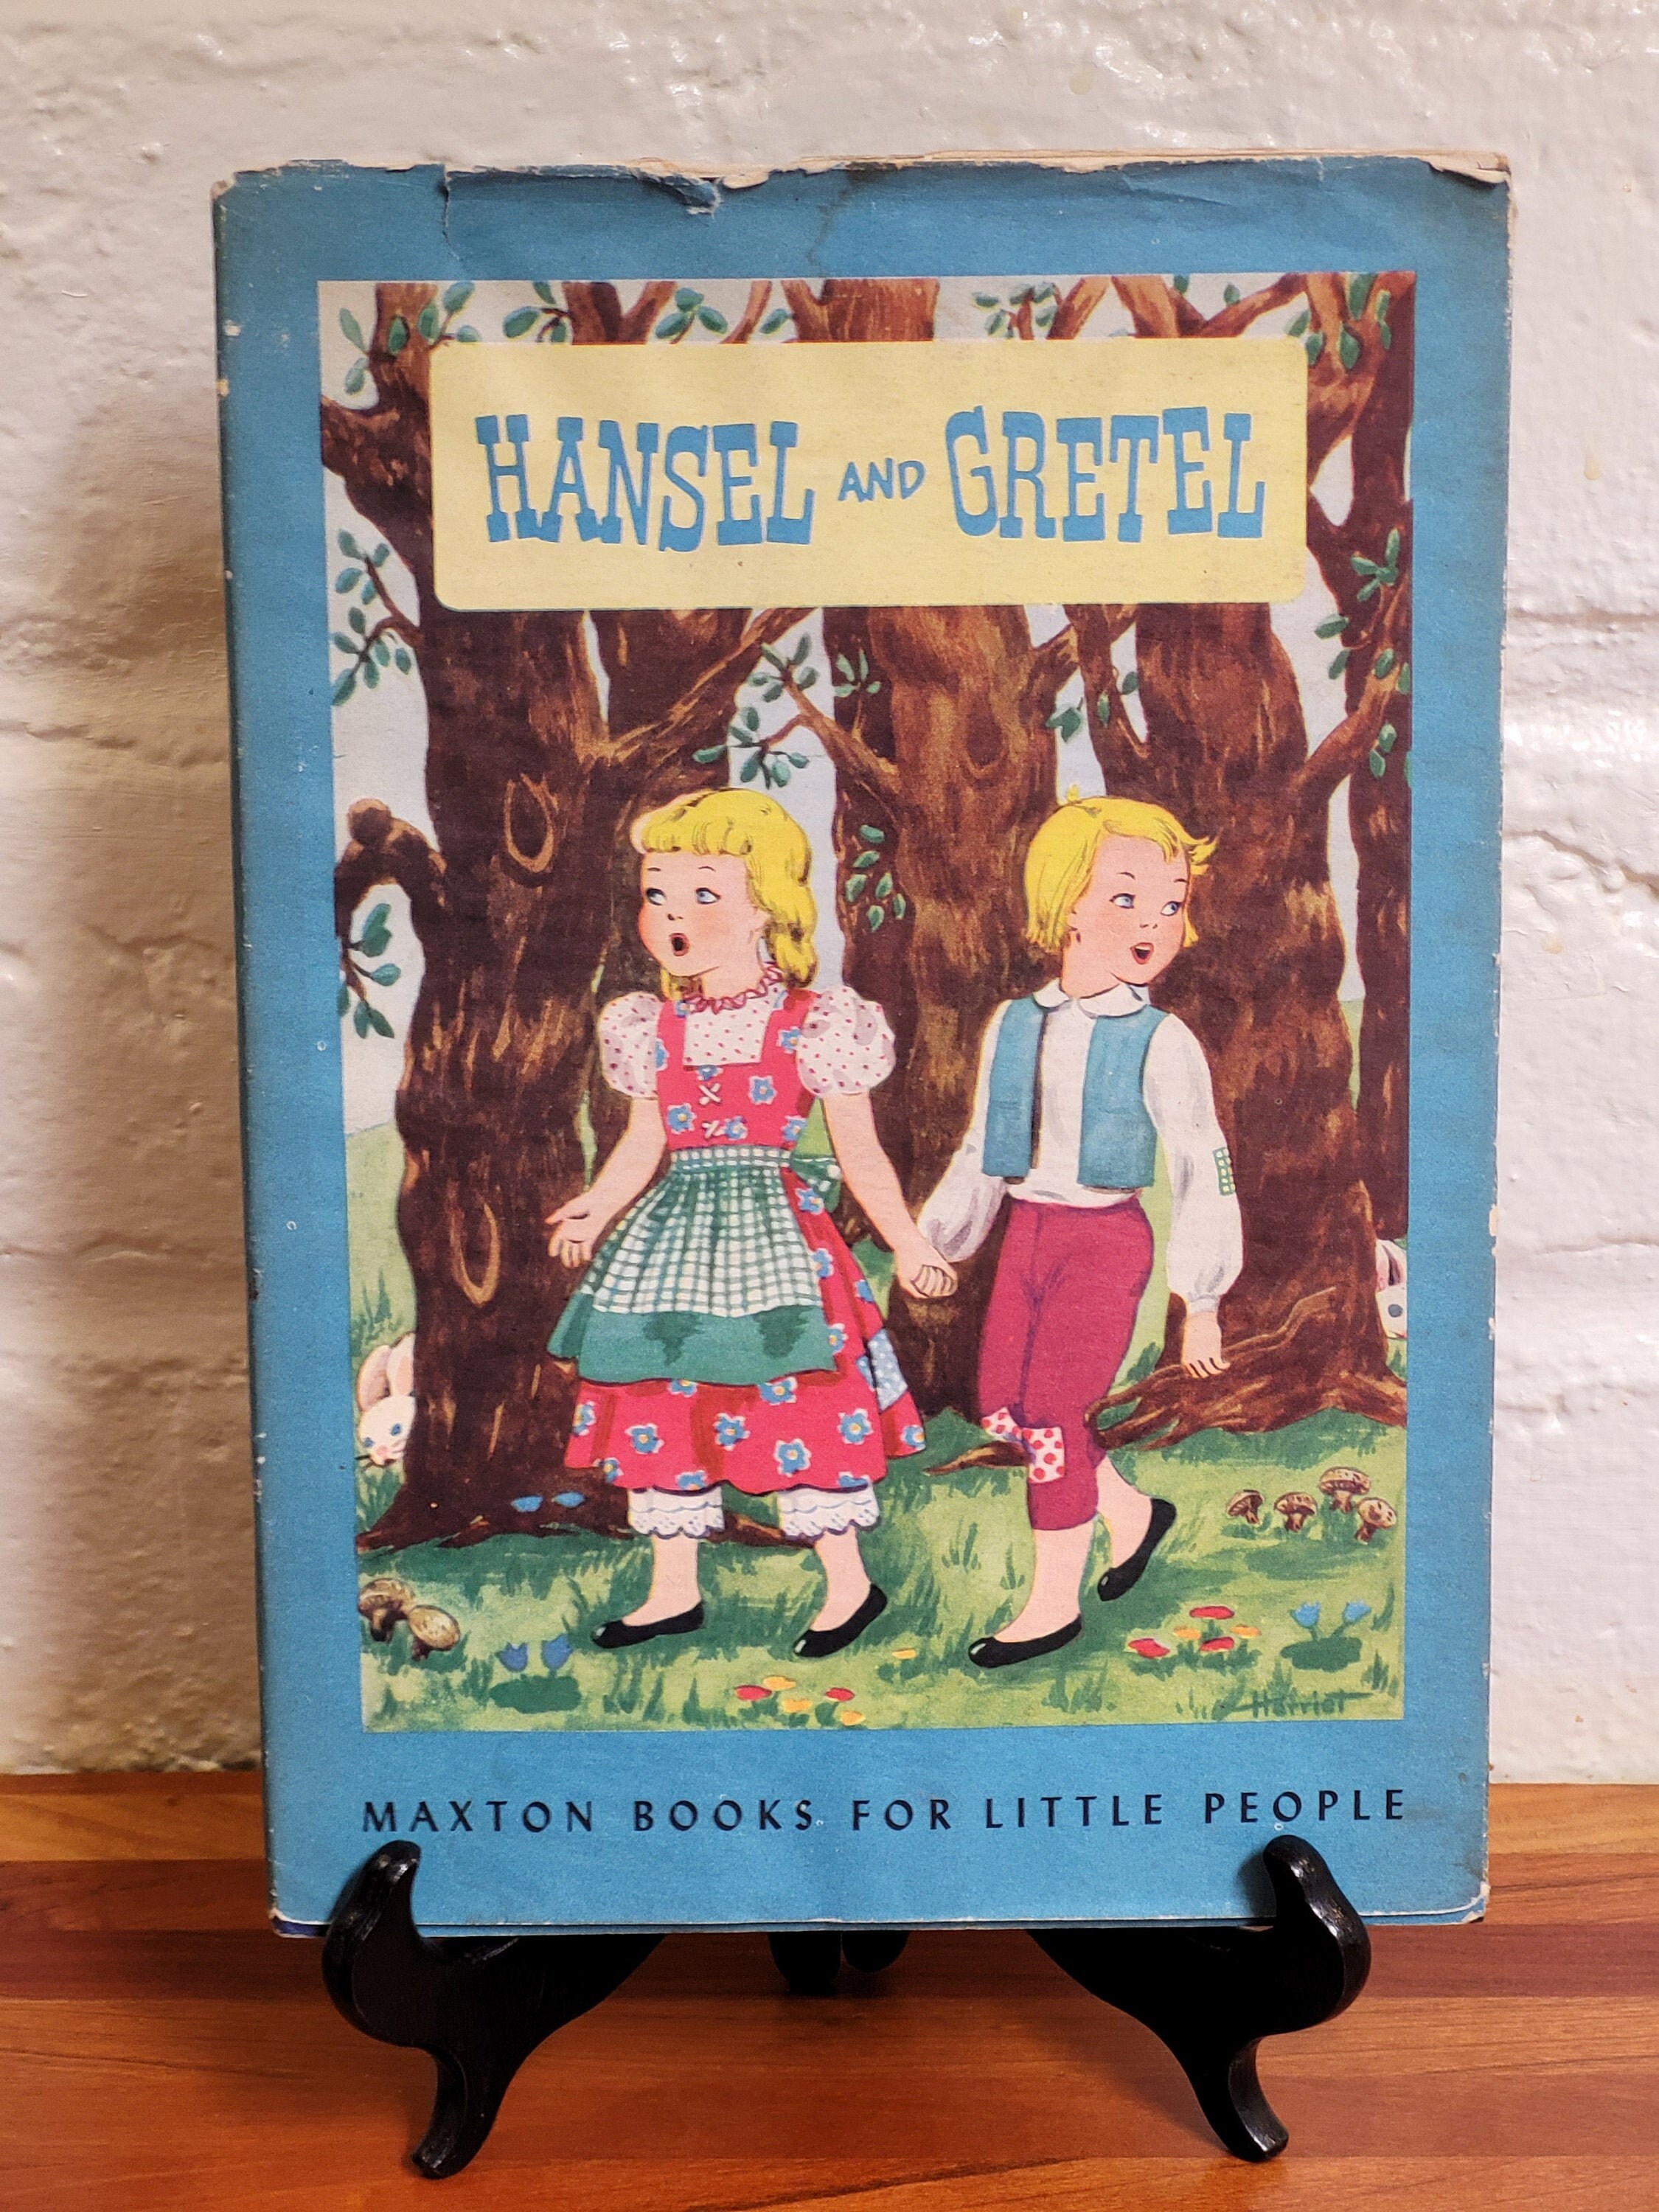 Hansel and Gretel Fairy tale (original) - Story by Brothers Grimm